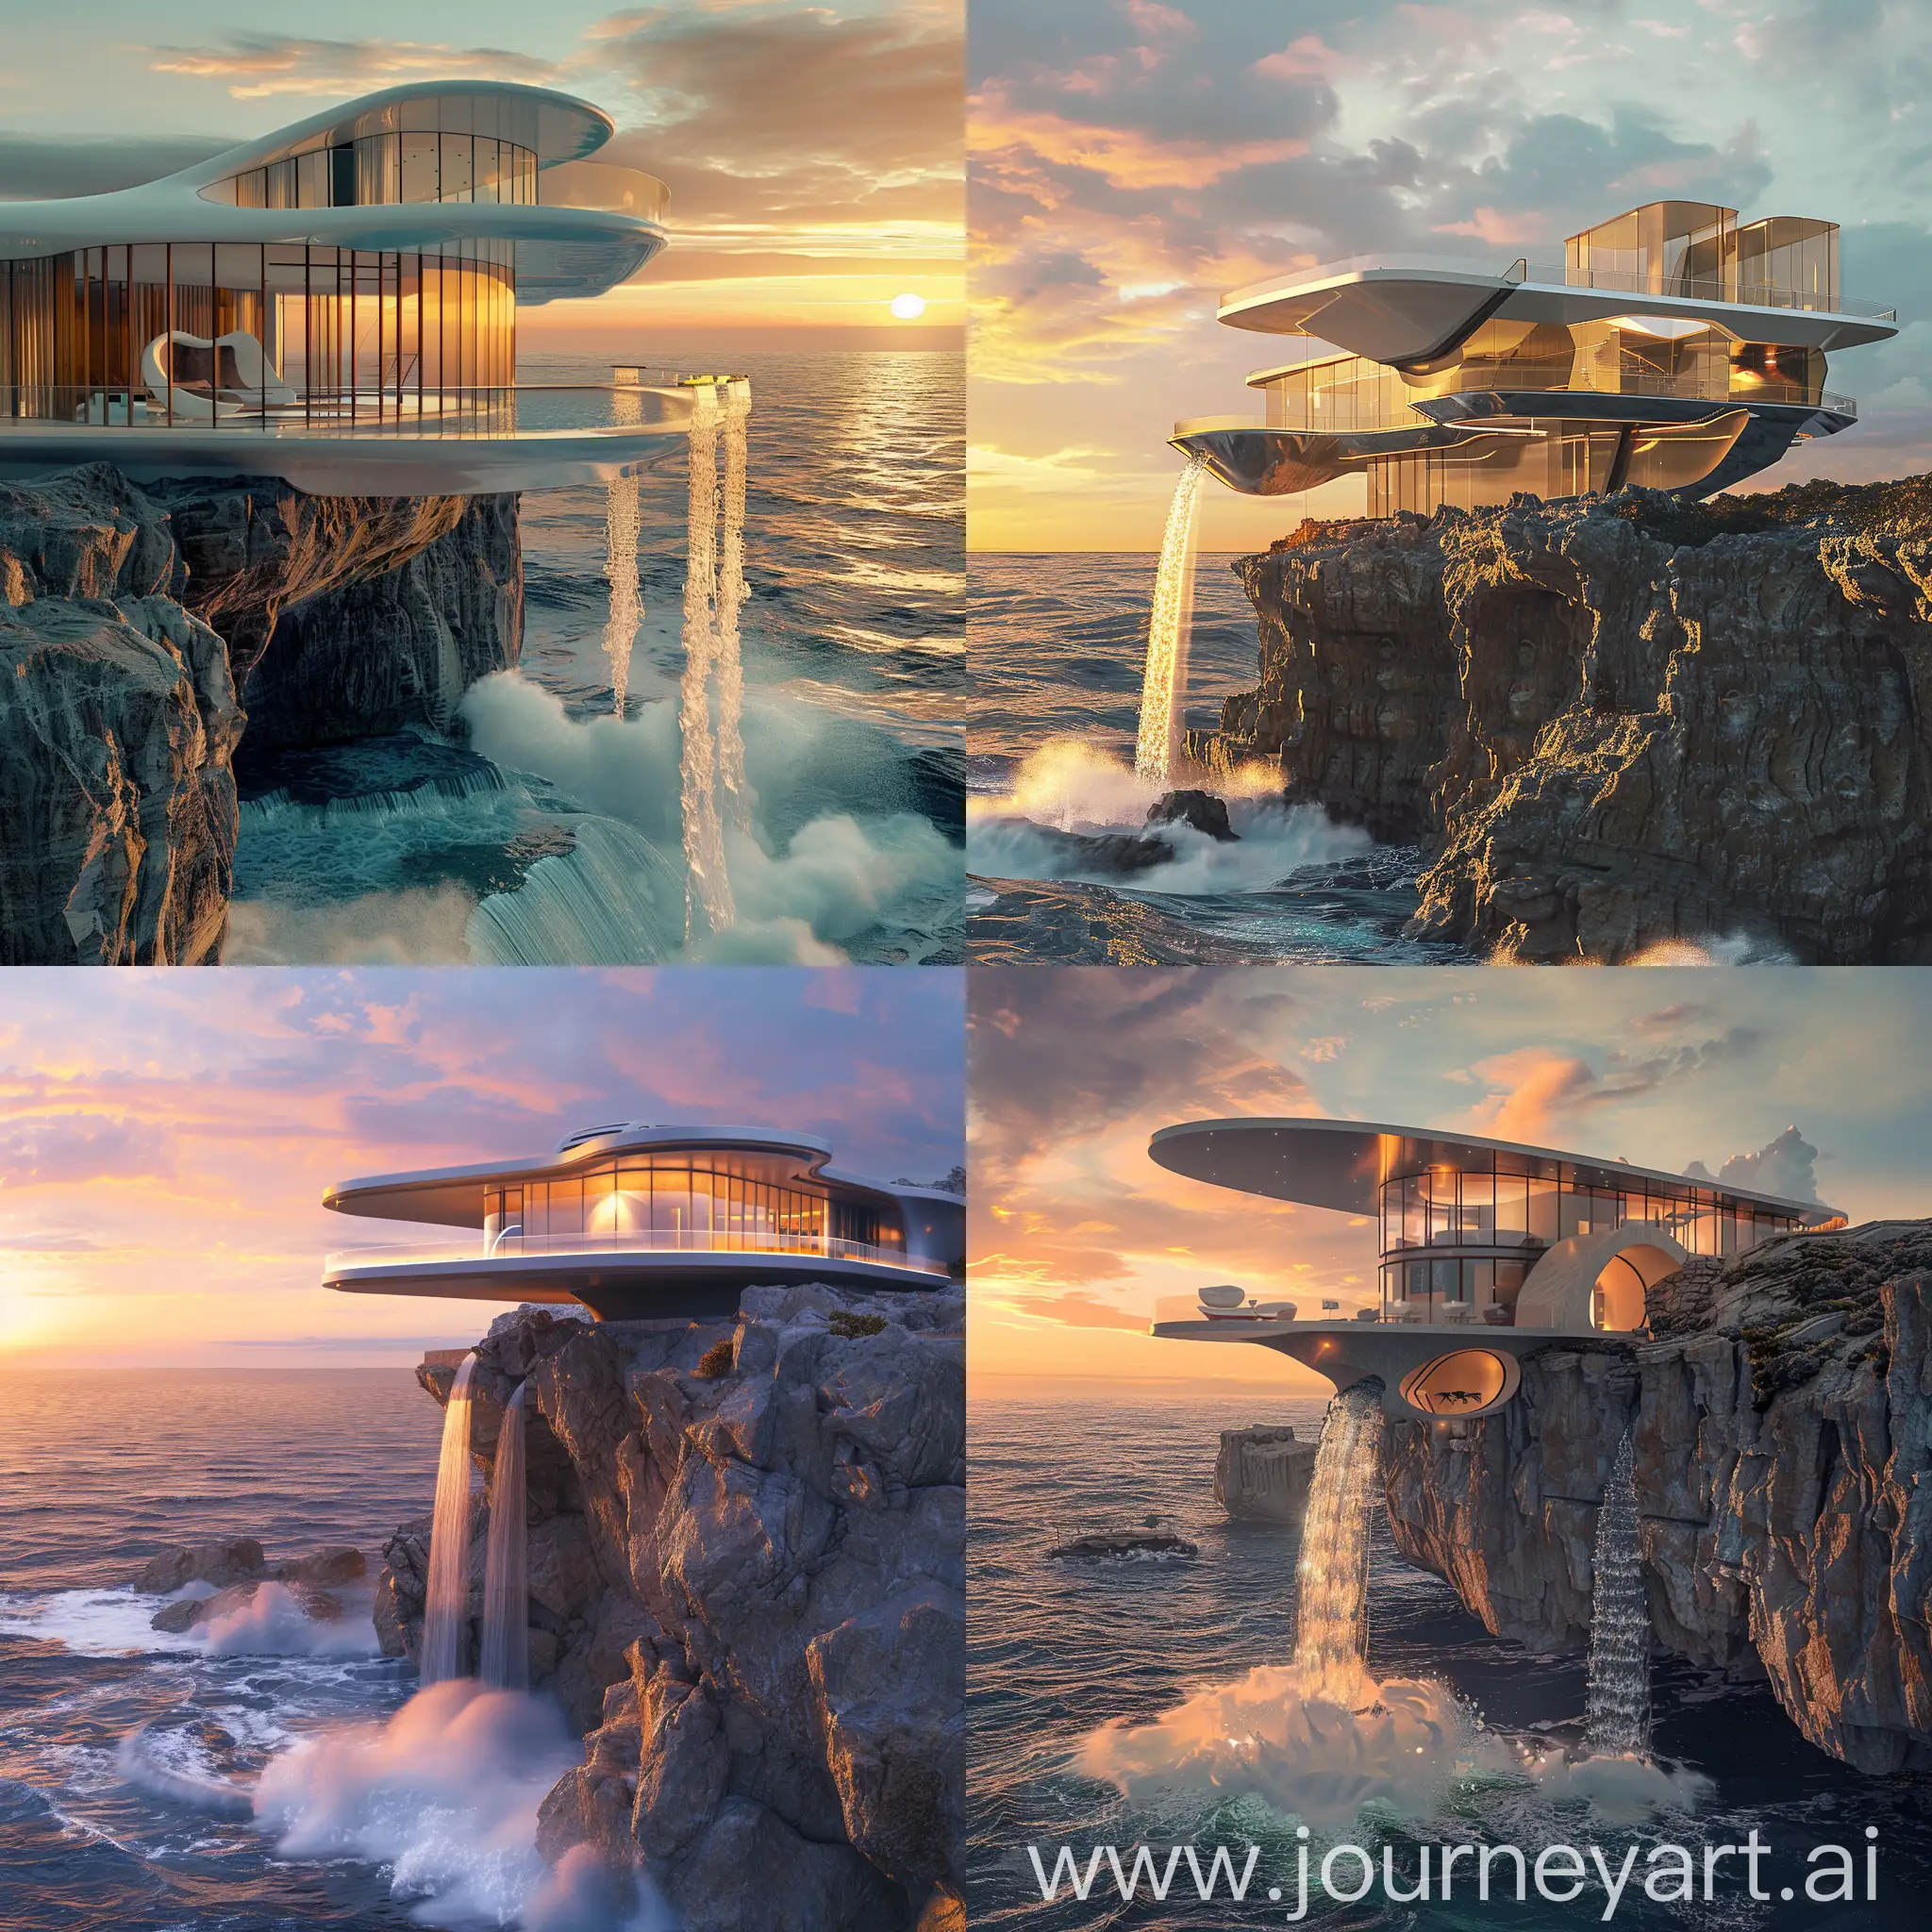 a very unusual but futuristic architectural house with lots of glass on a cliff overlooking breaking waves of the sea. Waterfall comes out of the house. Golden hour sunset lighting